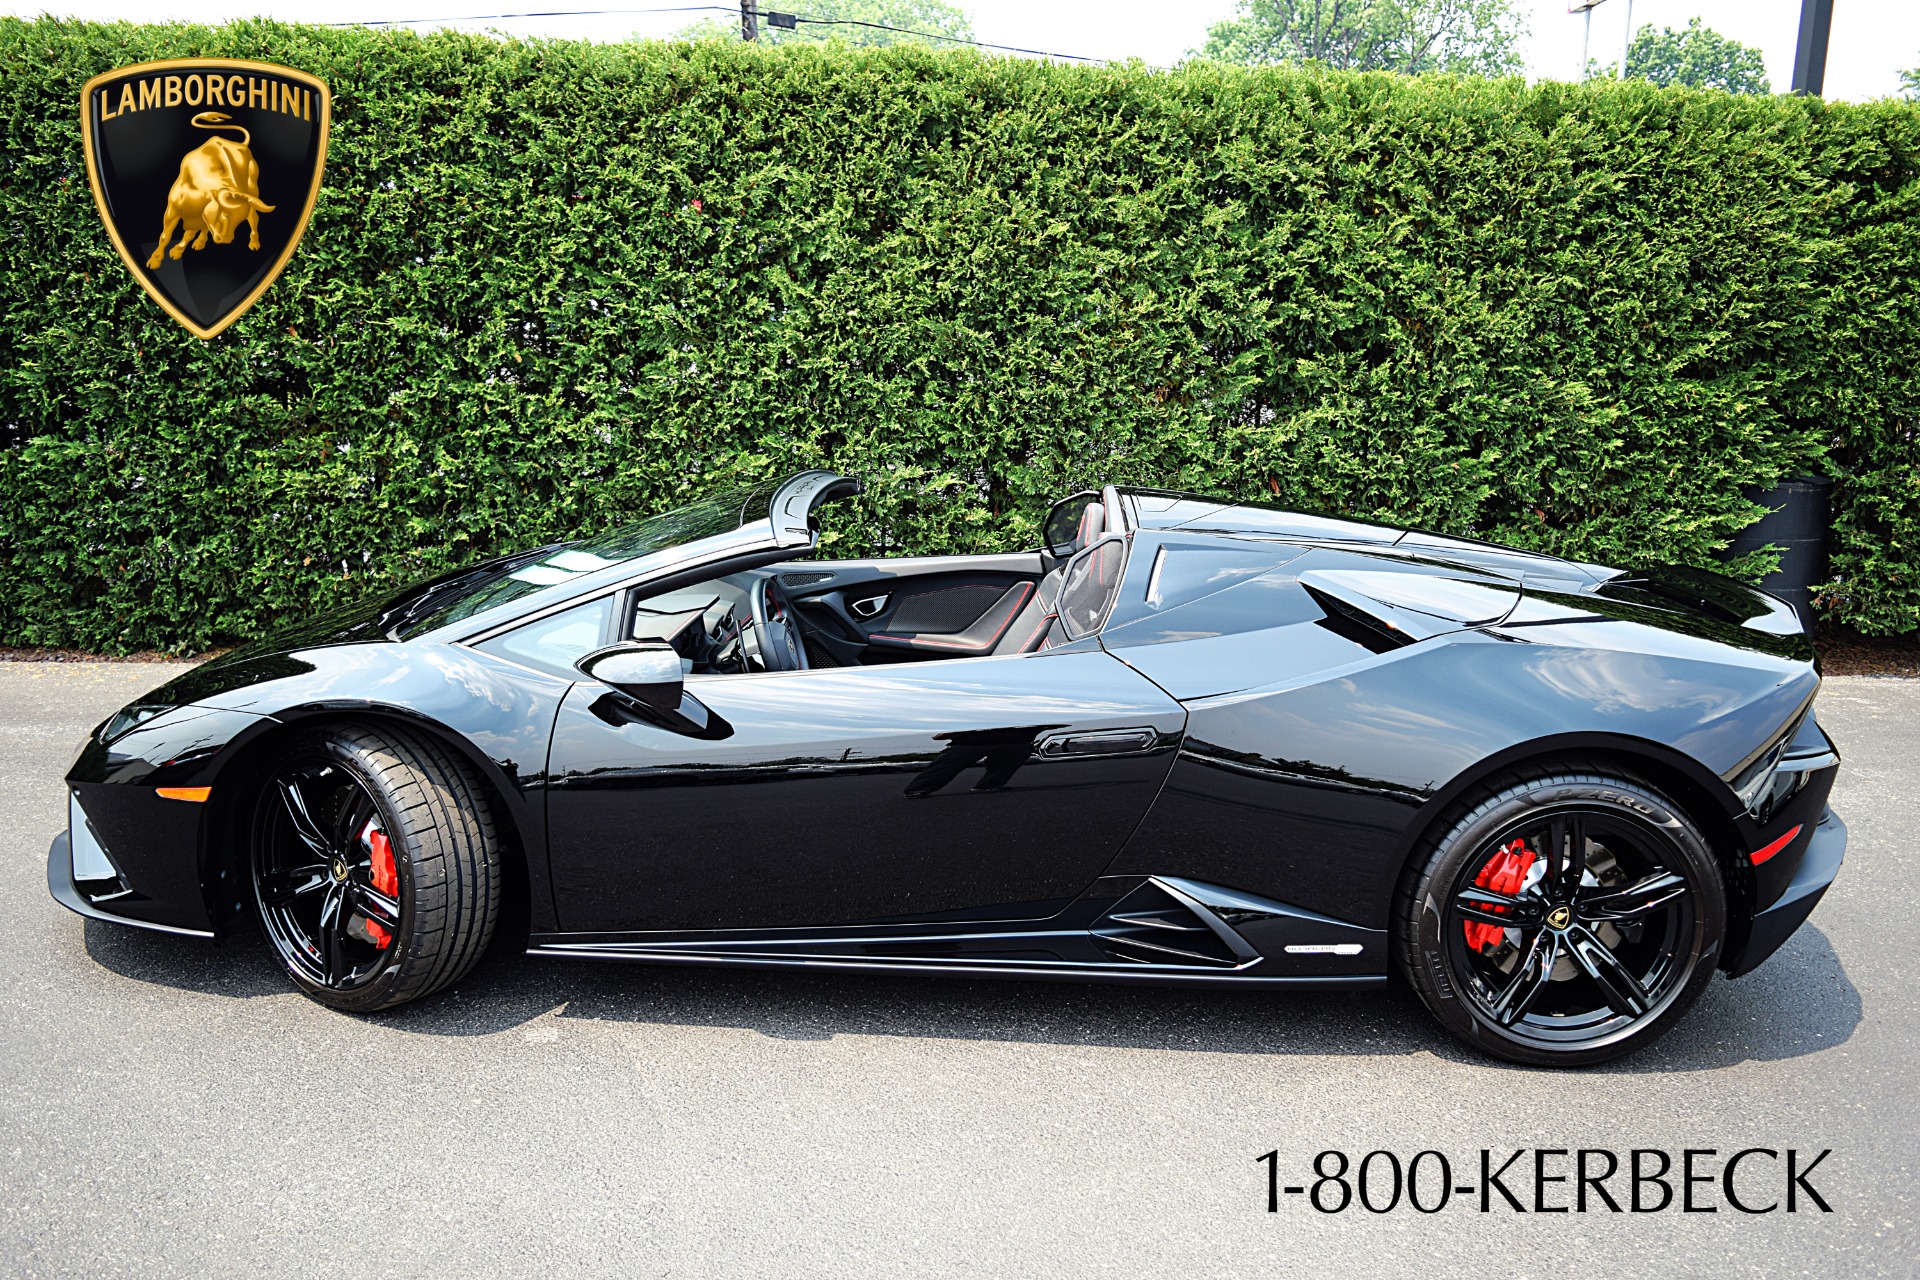 Used 2020 Lamborghini Huracan EVO Spyder RWD / LEASE OPTIONS AVAILABLE for sale $319,000 at Bentley Palmyra N.J. in Palmyra NJ 08065 2